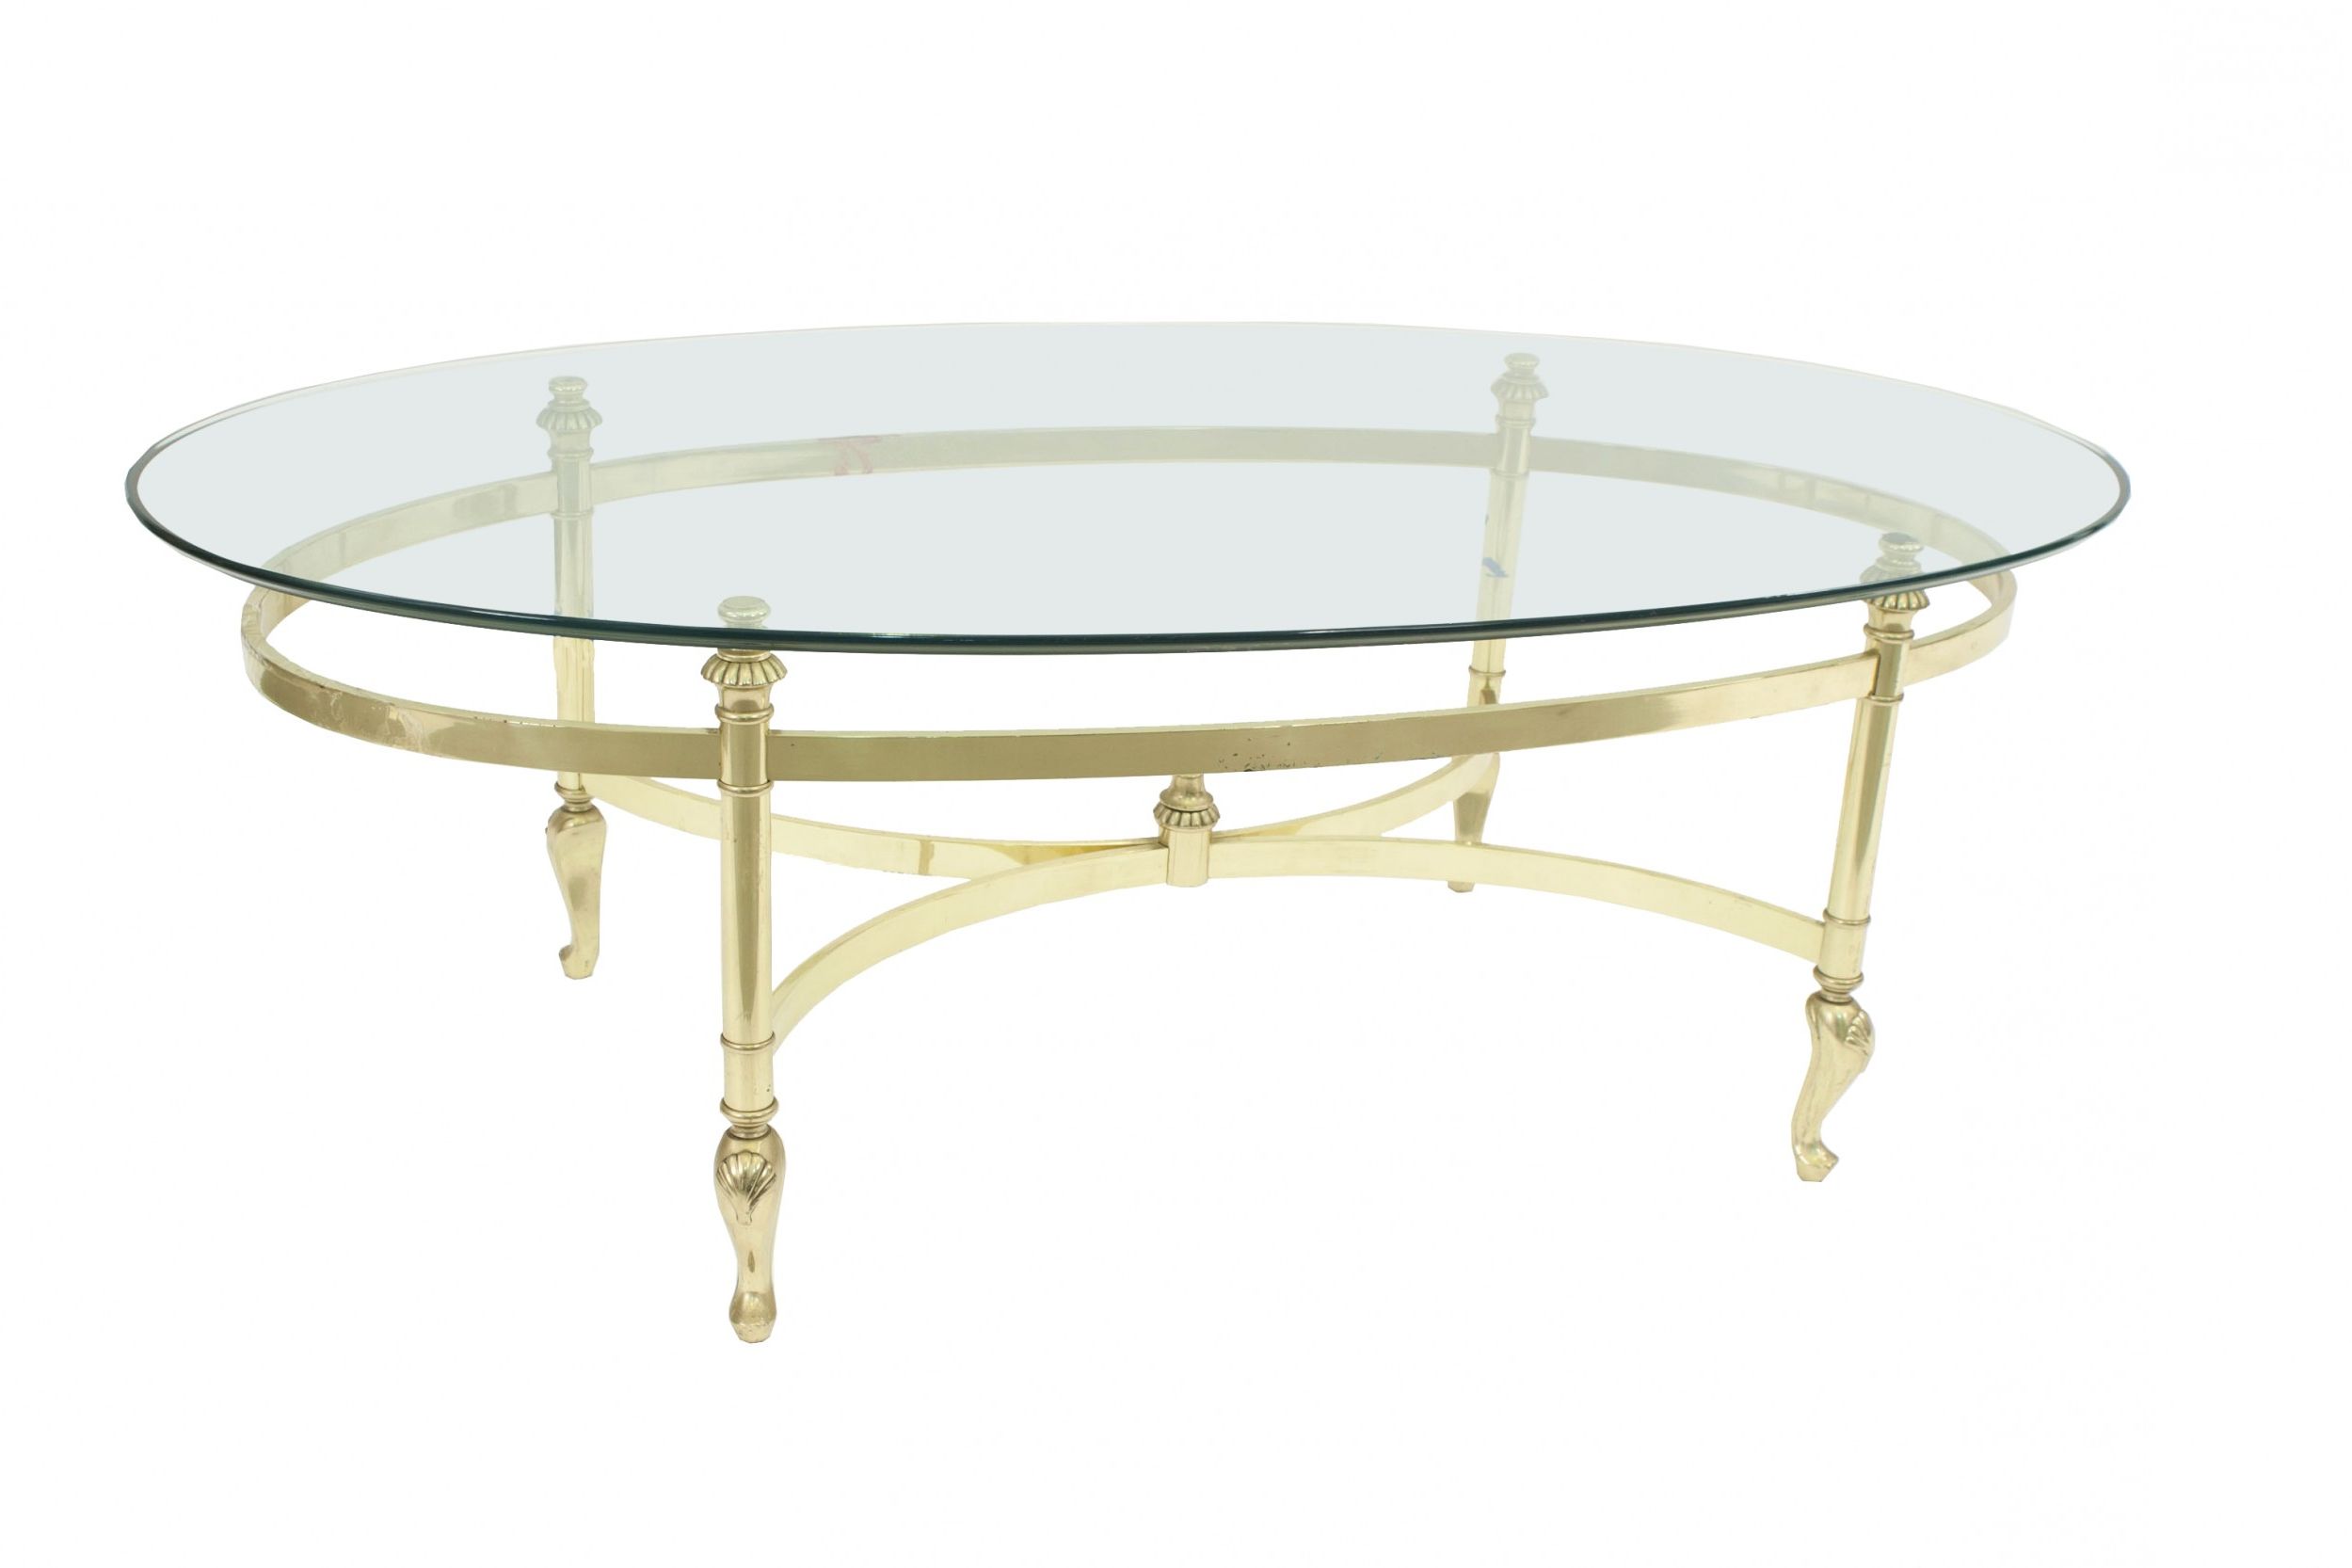 Trendy Oval Glass Coffee Tables Pertaining To Contemporary Brass And Glass Coffee Table (View 10 of 10)